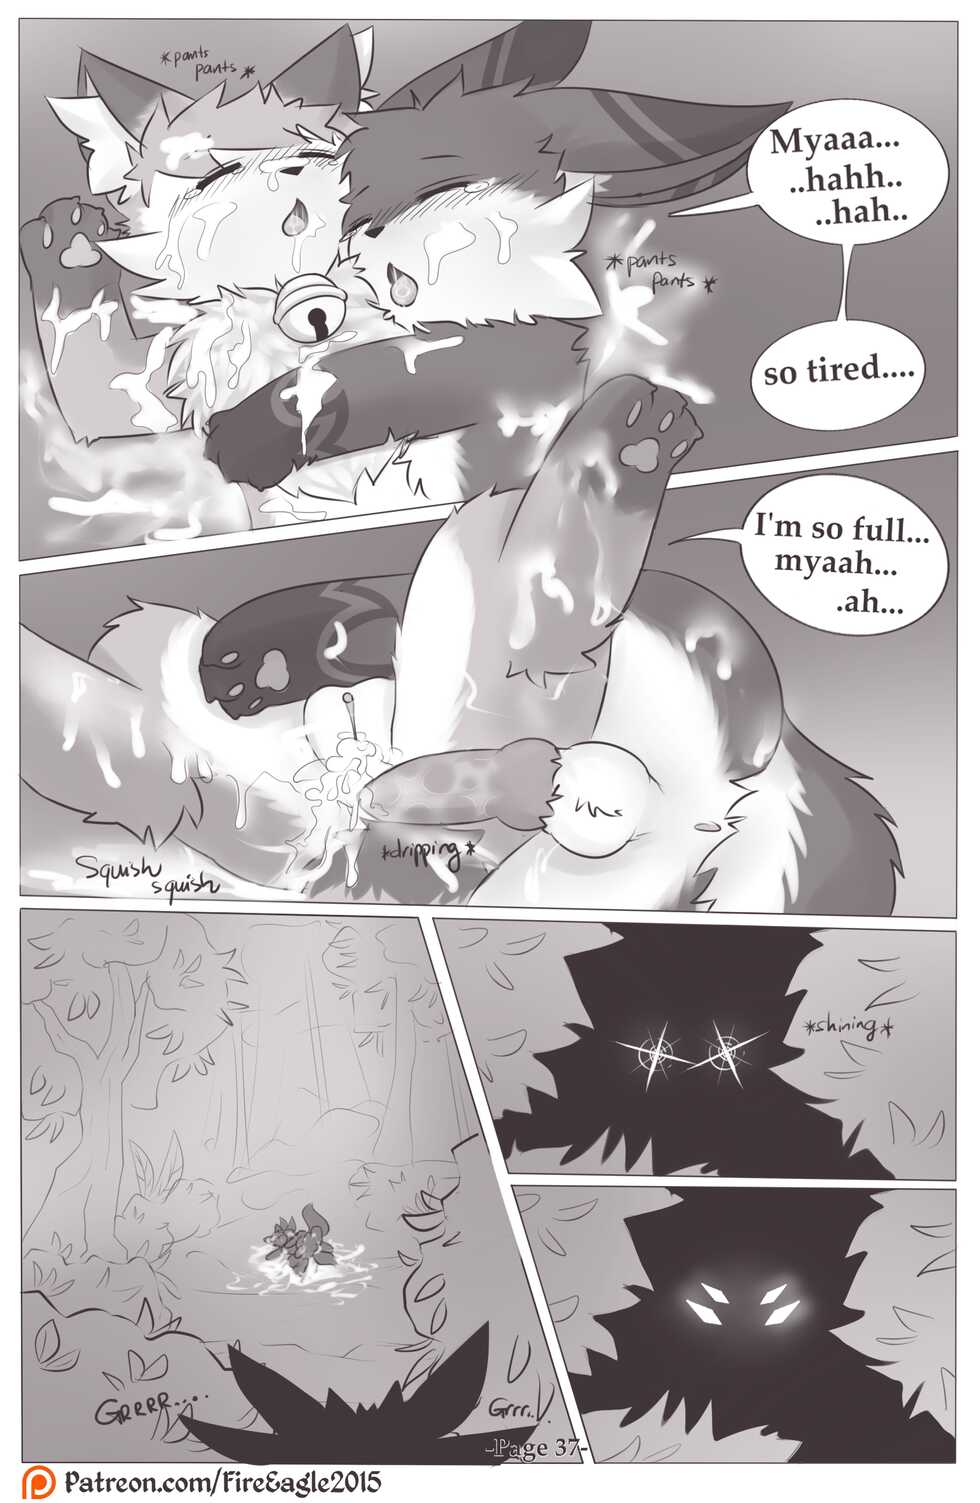 FireEagle2015 - Ancient Relic Adventure [Doujinshi] - Page 37